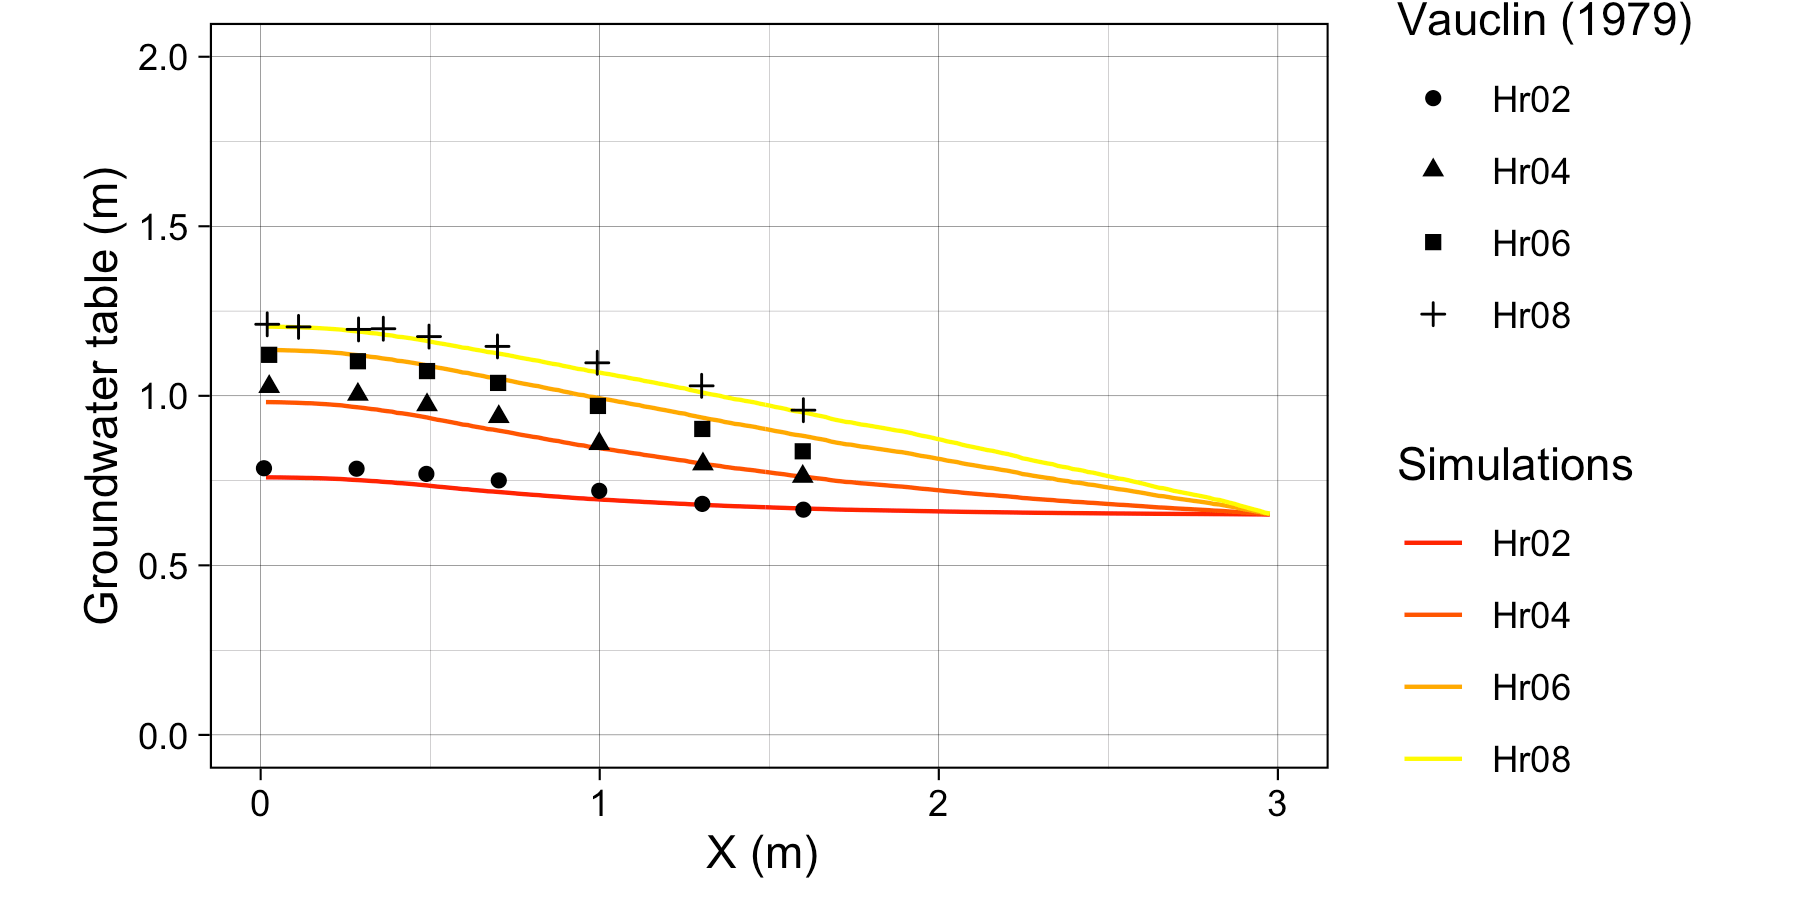 Simulation results from SHUD model versus Vauclin (1979) measurement